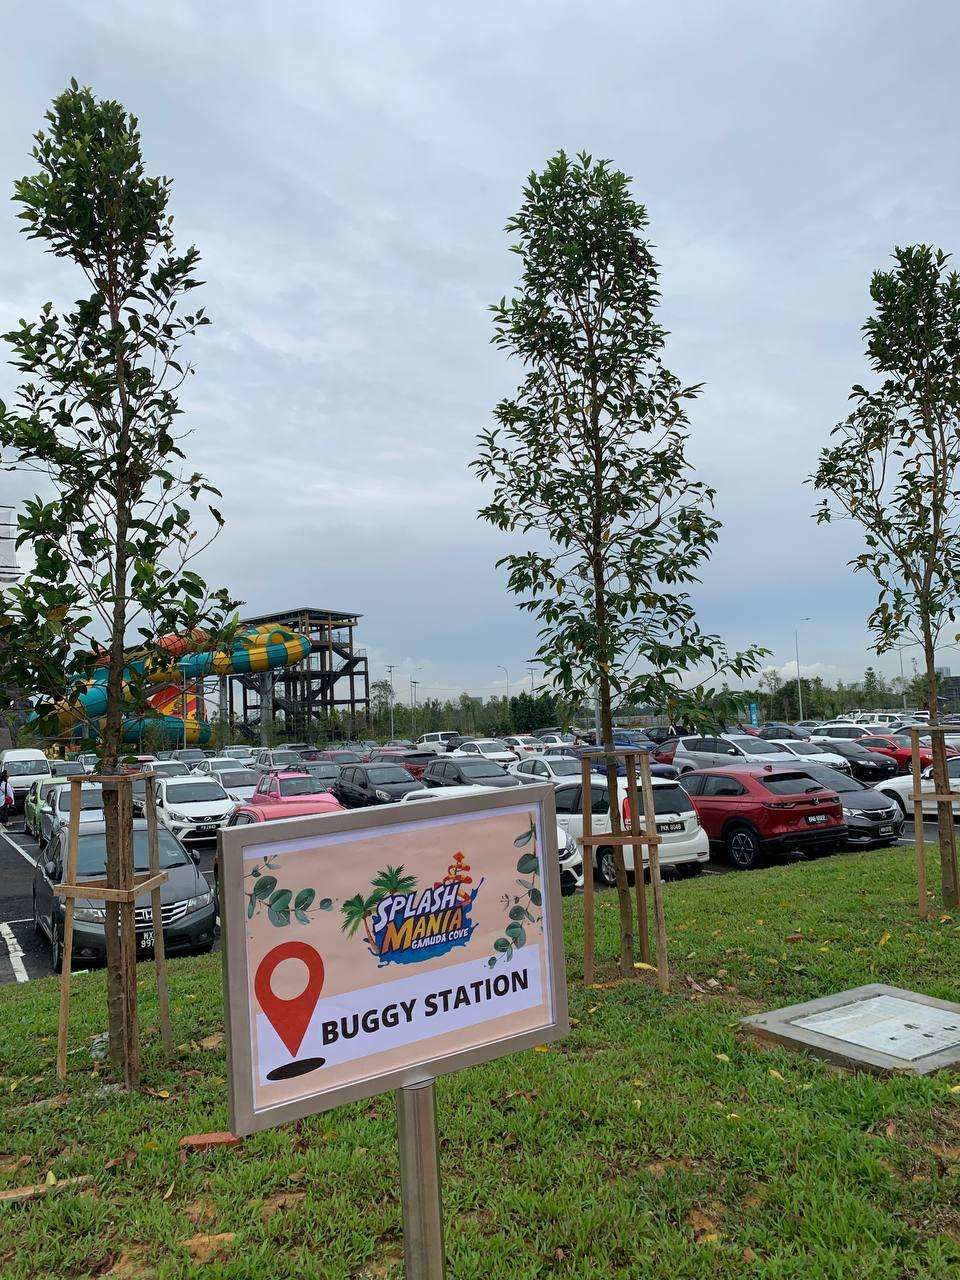 5 must-try rides and attractions at gamuda cove's splashmania waterpark